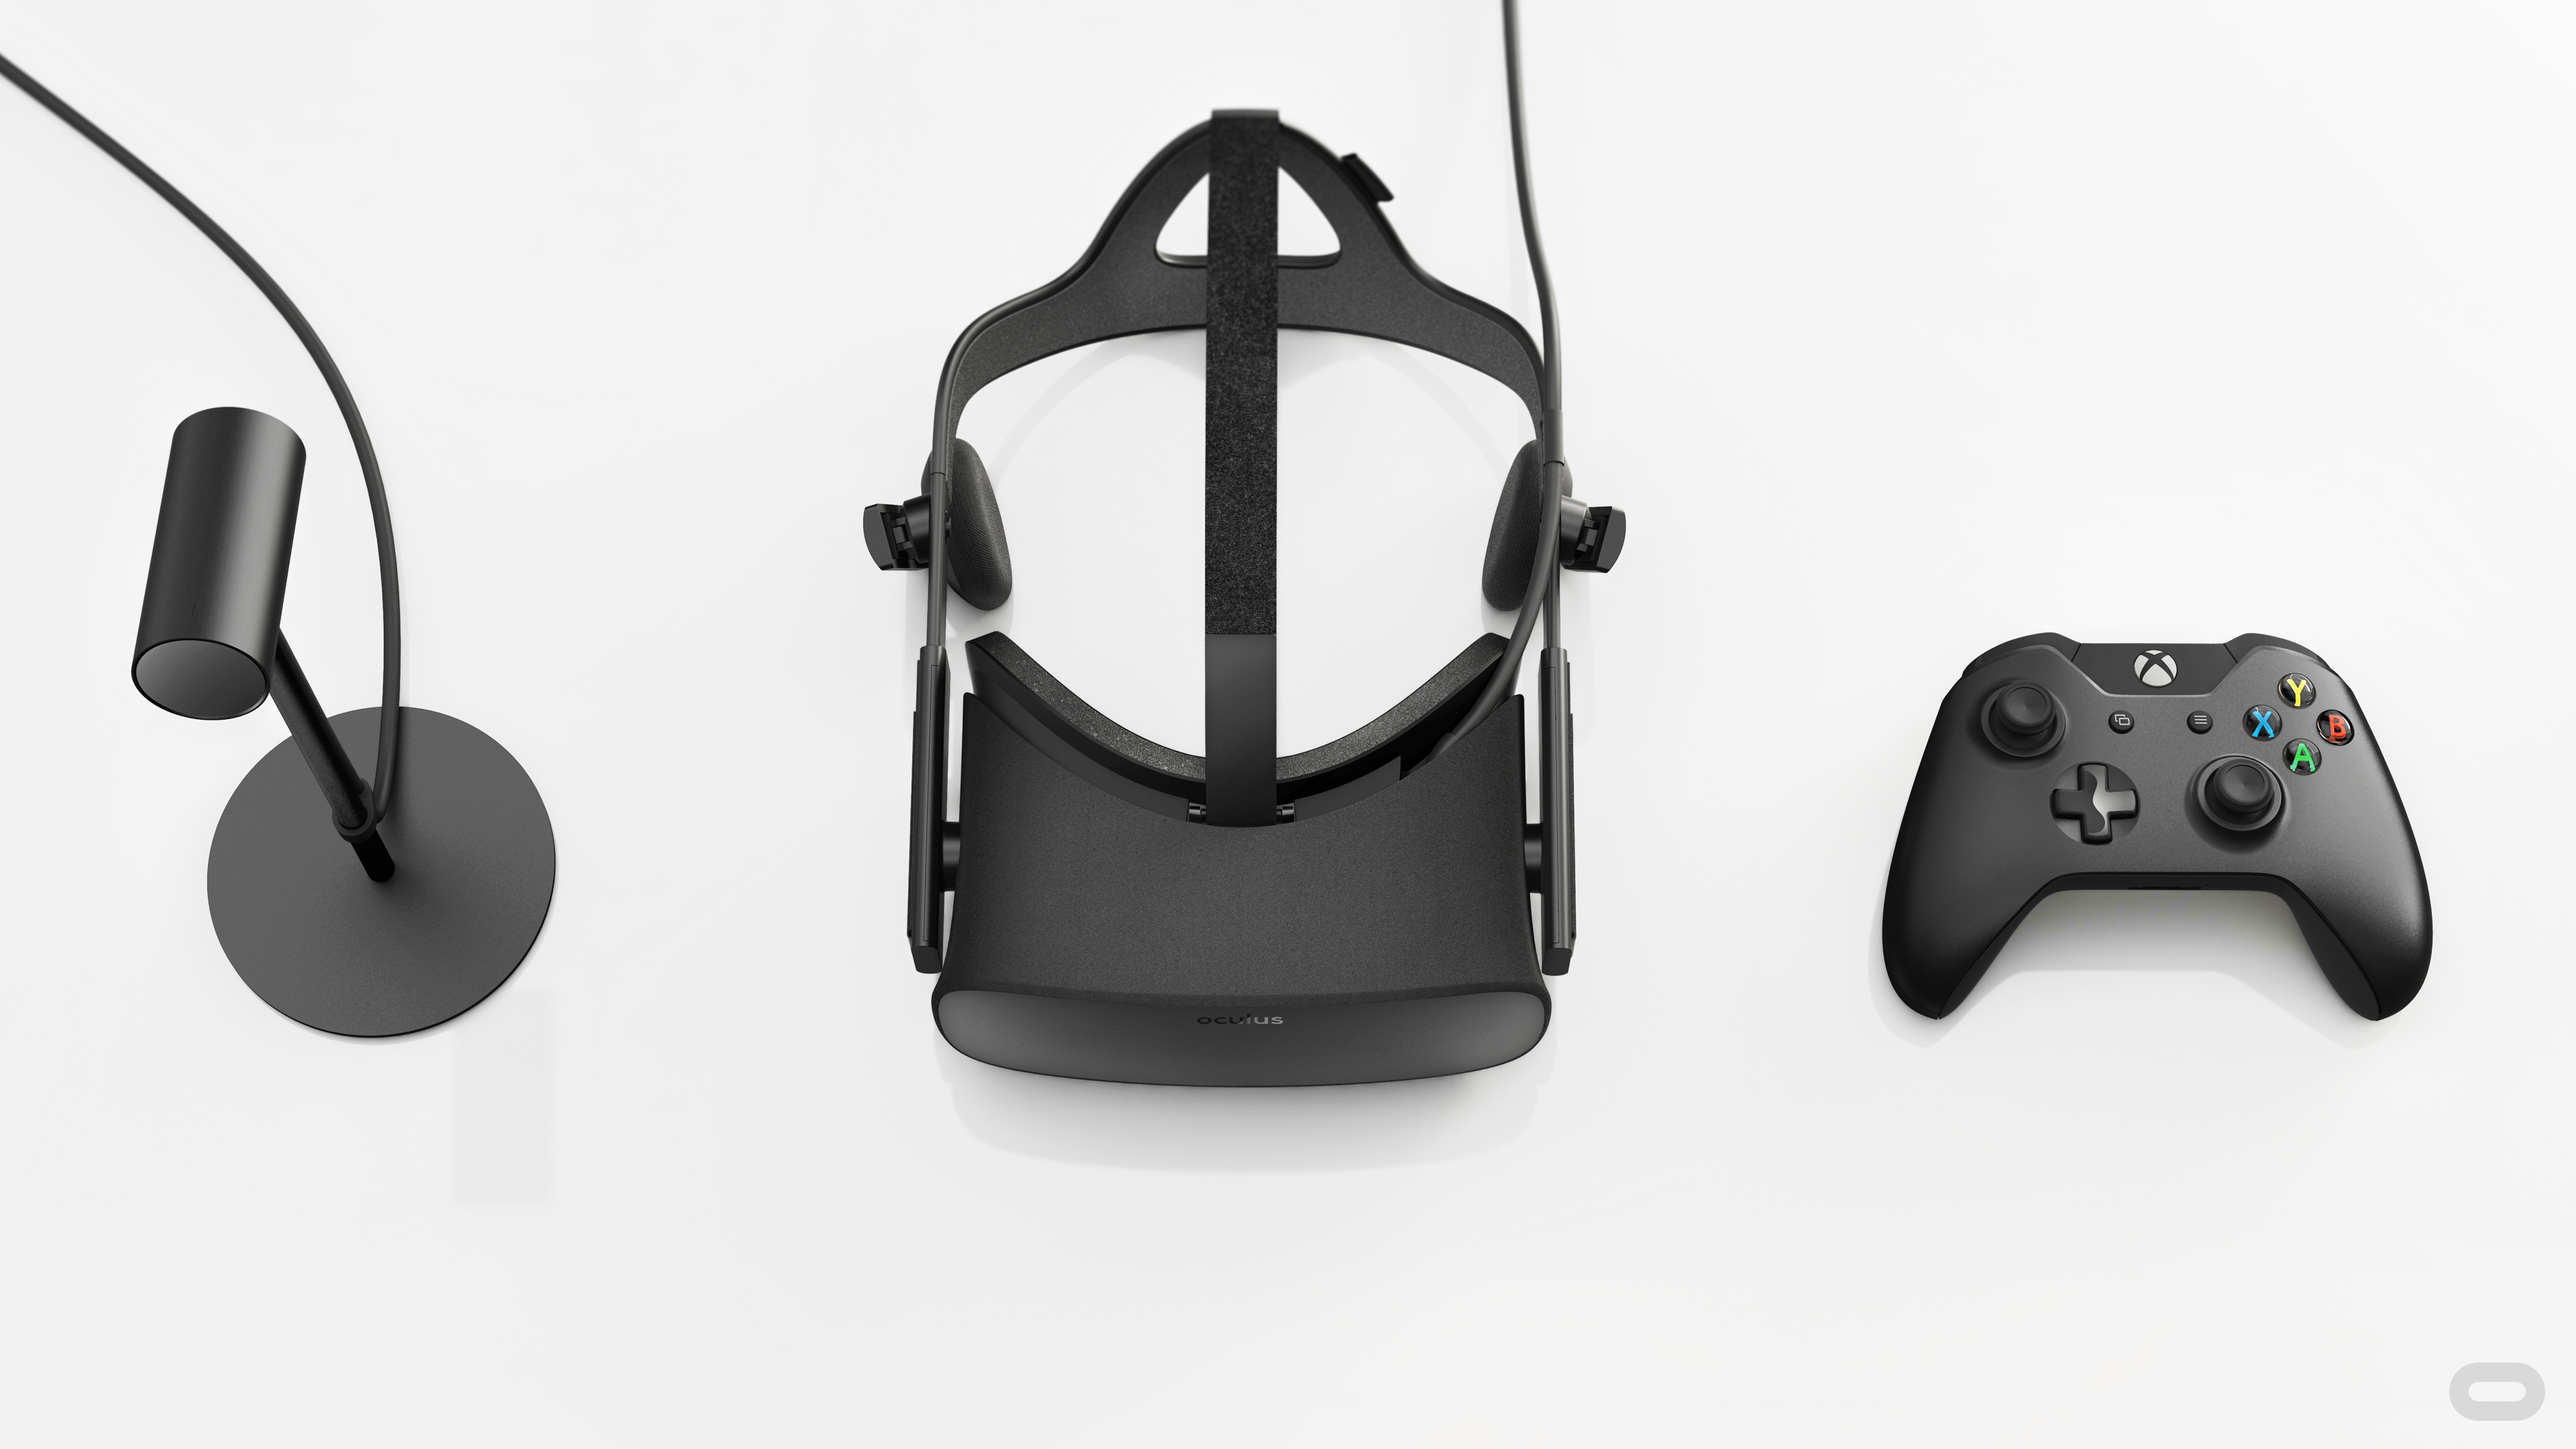 The camera, headset and a controller bundled along it, image from the oculus media kit